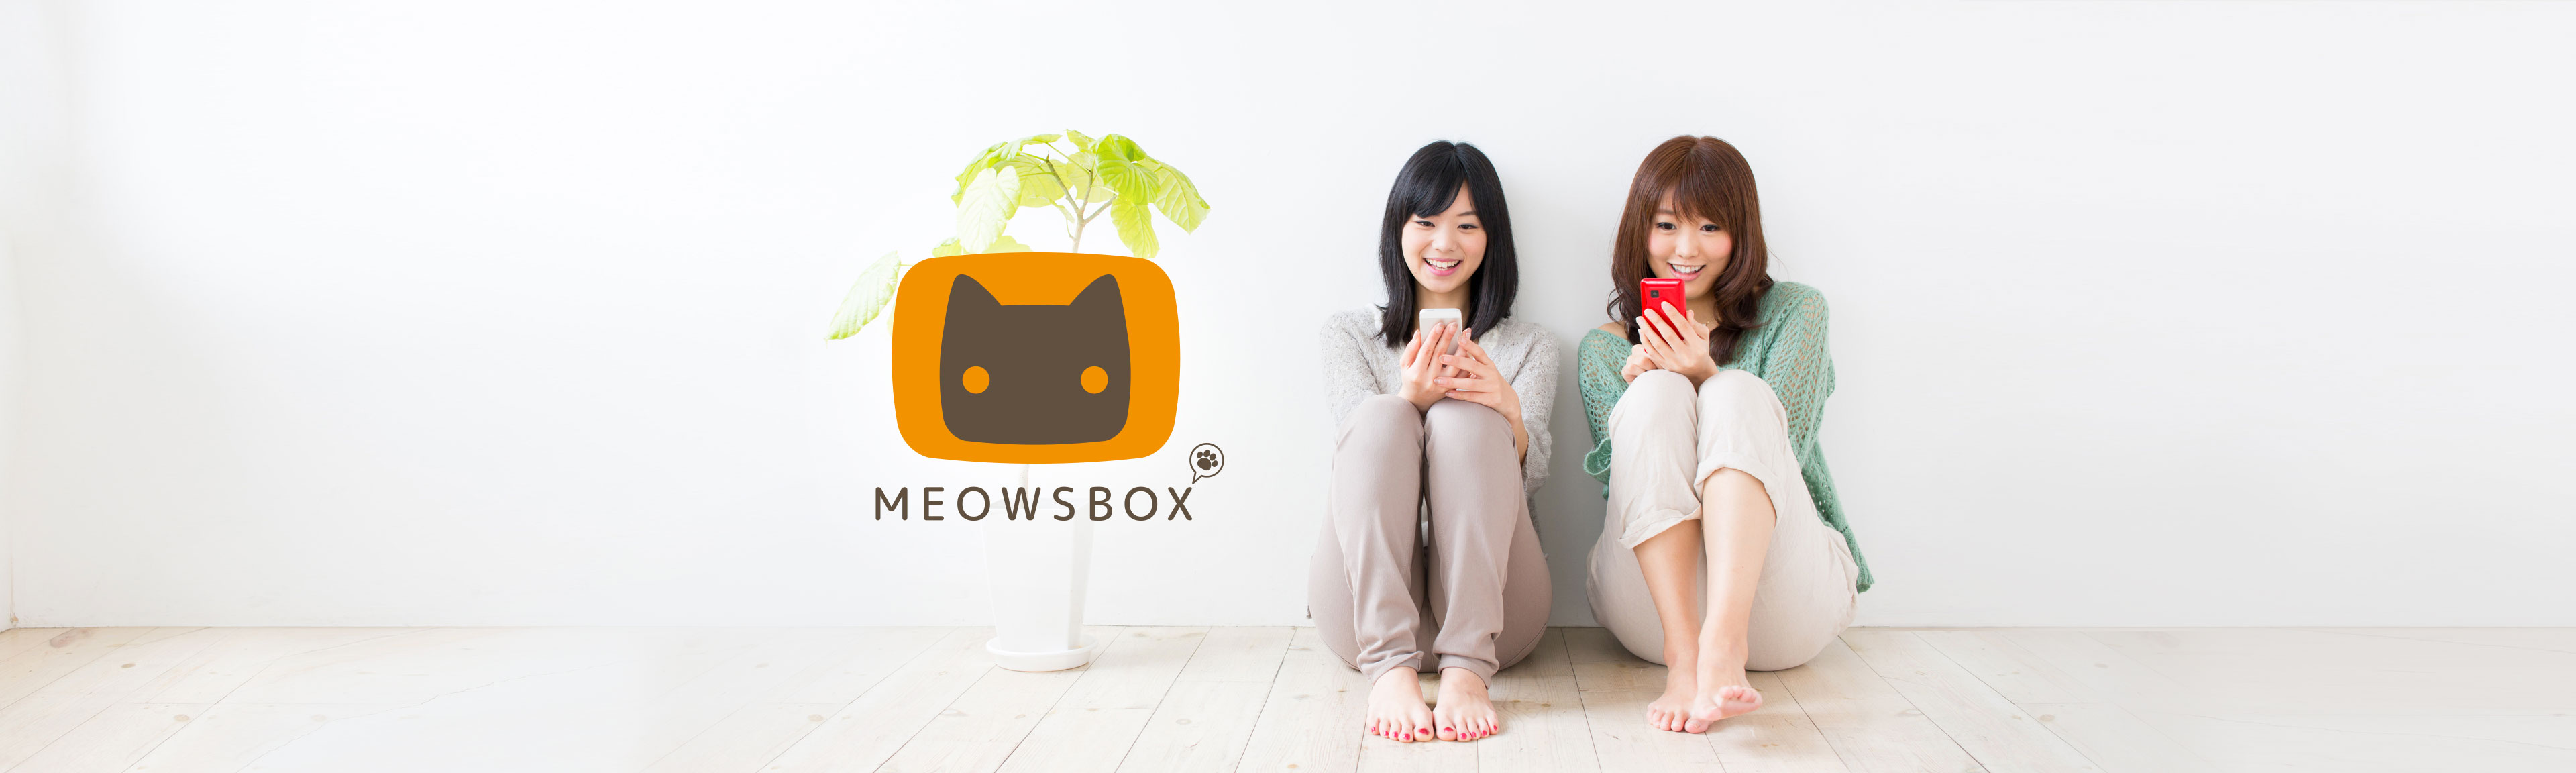 Welcome to Meowsbox